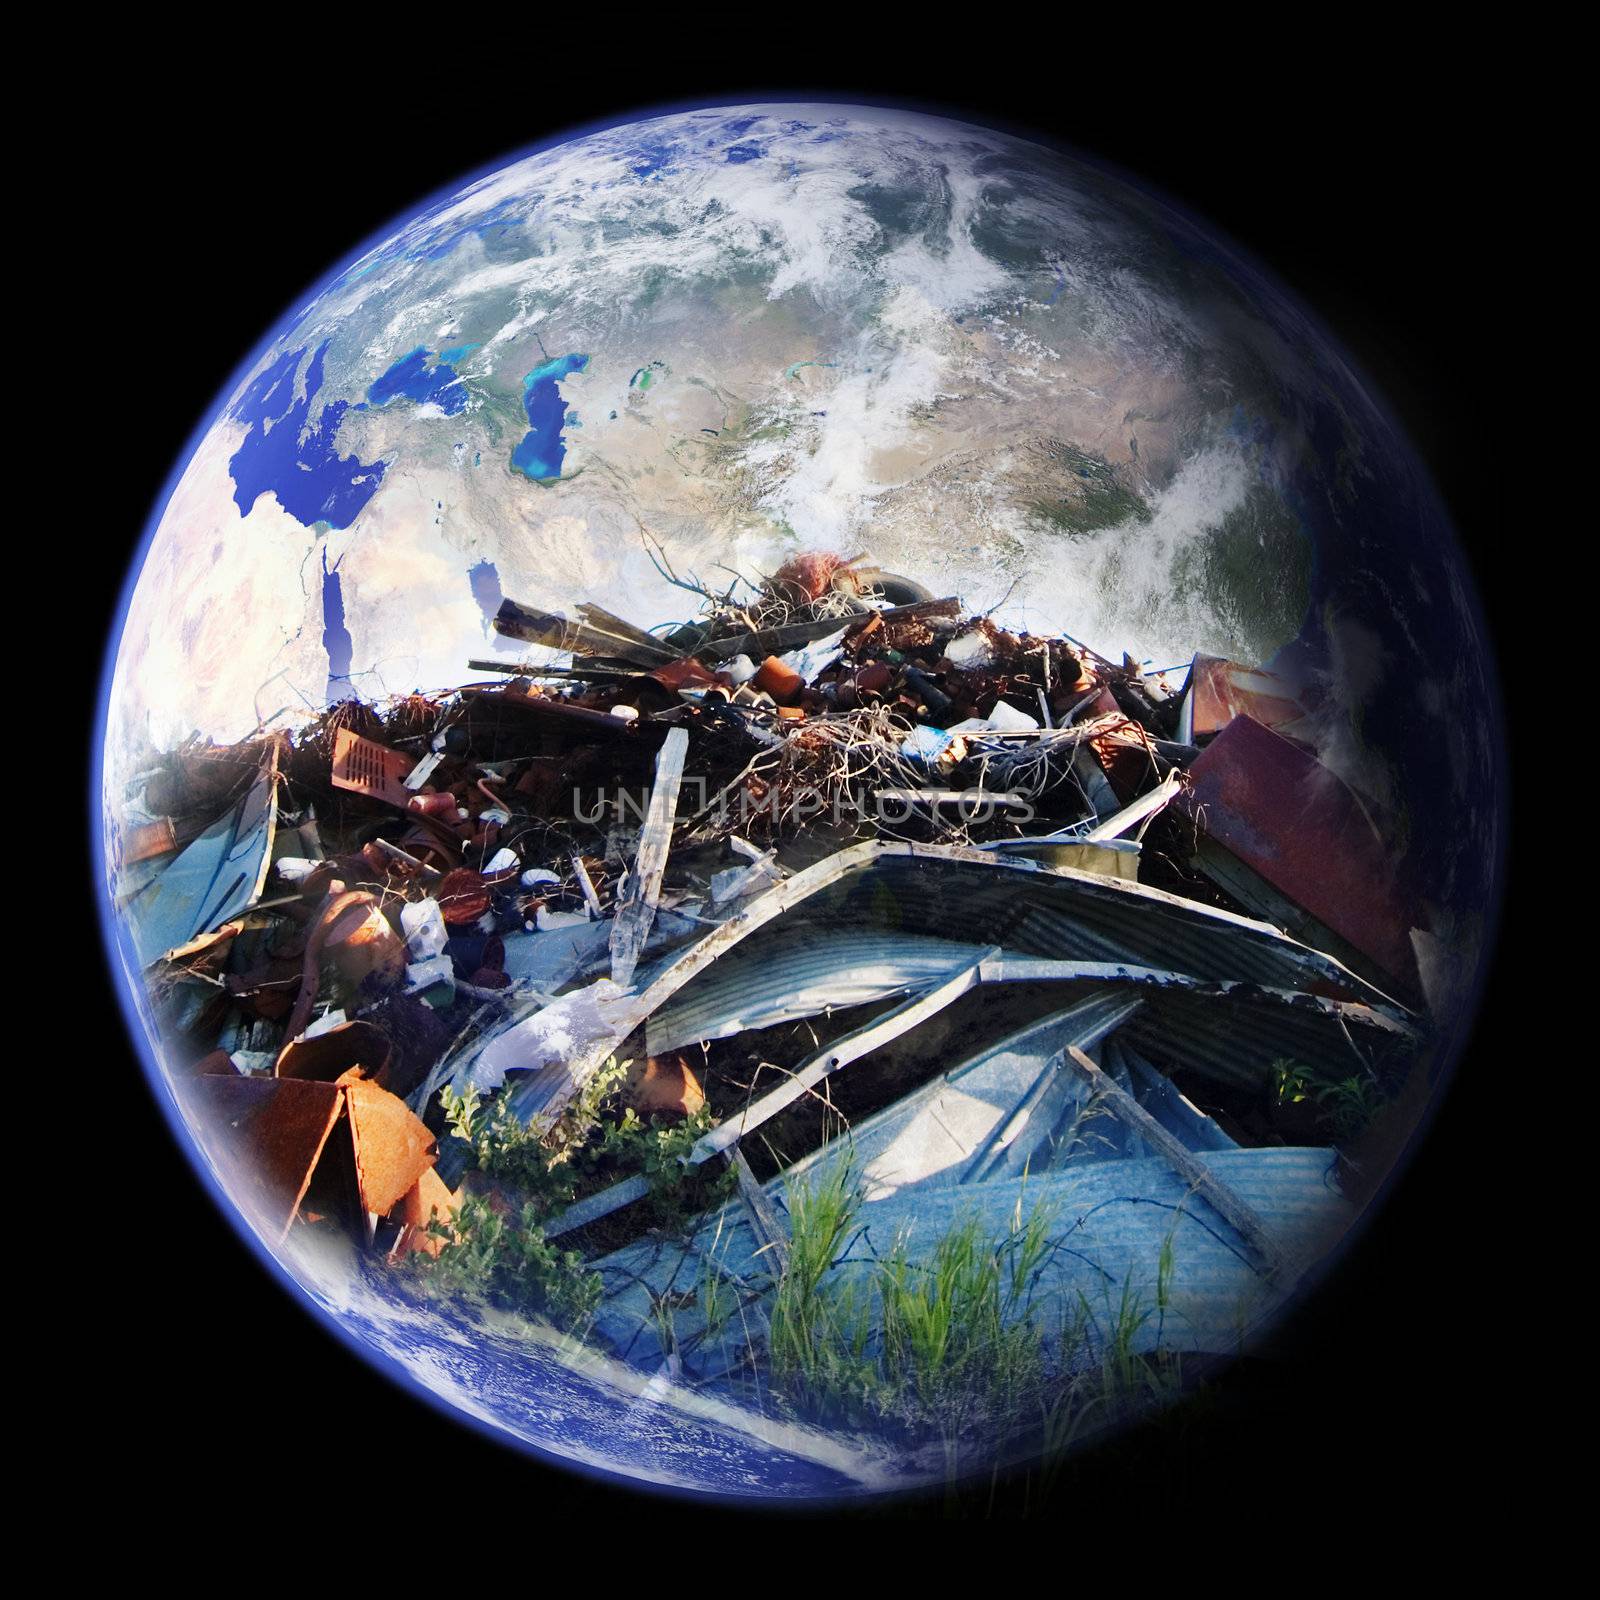 A large pile of garbage double exposed on the planet earth - eastern hemisphere